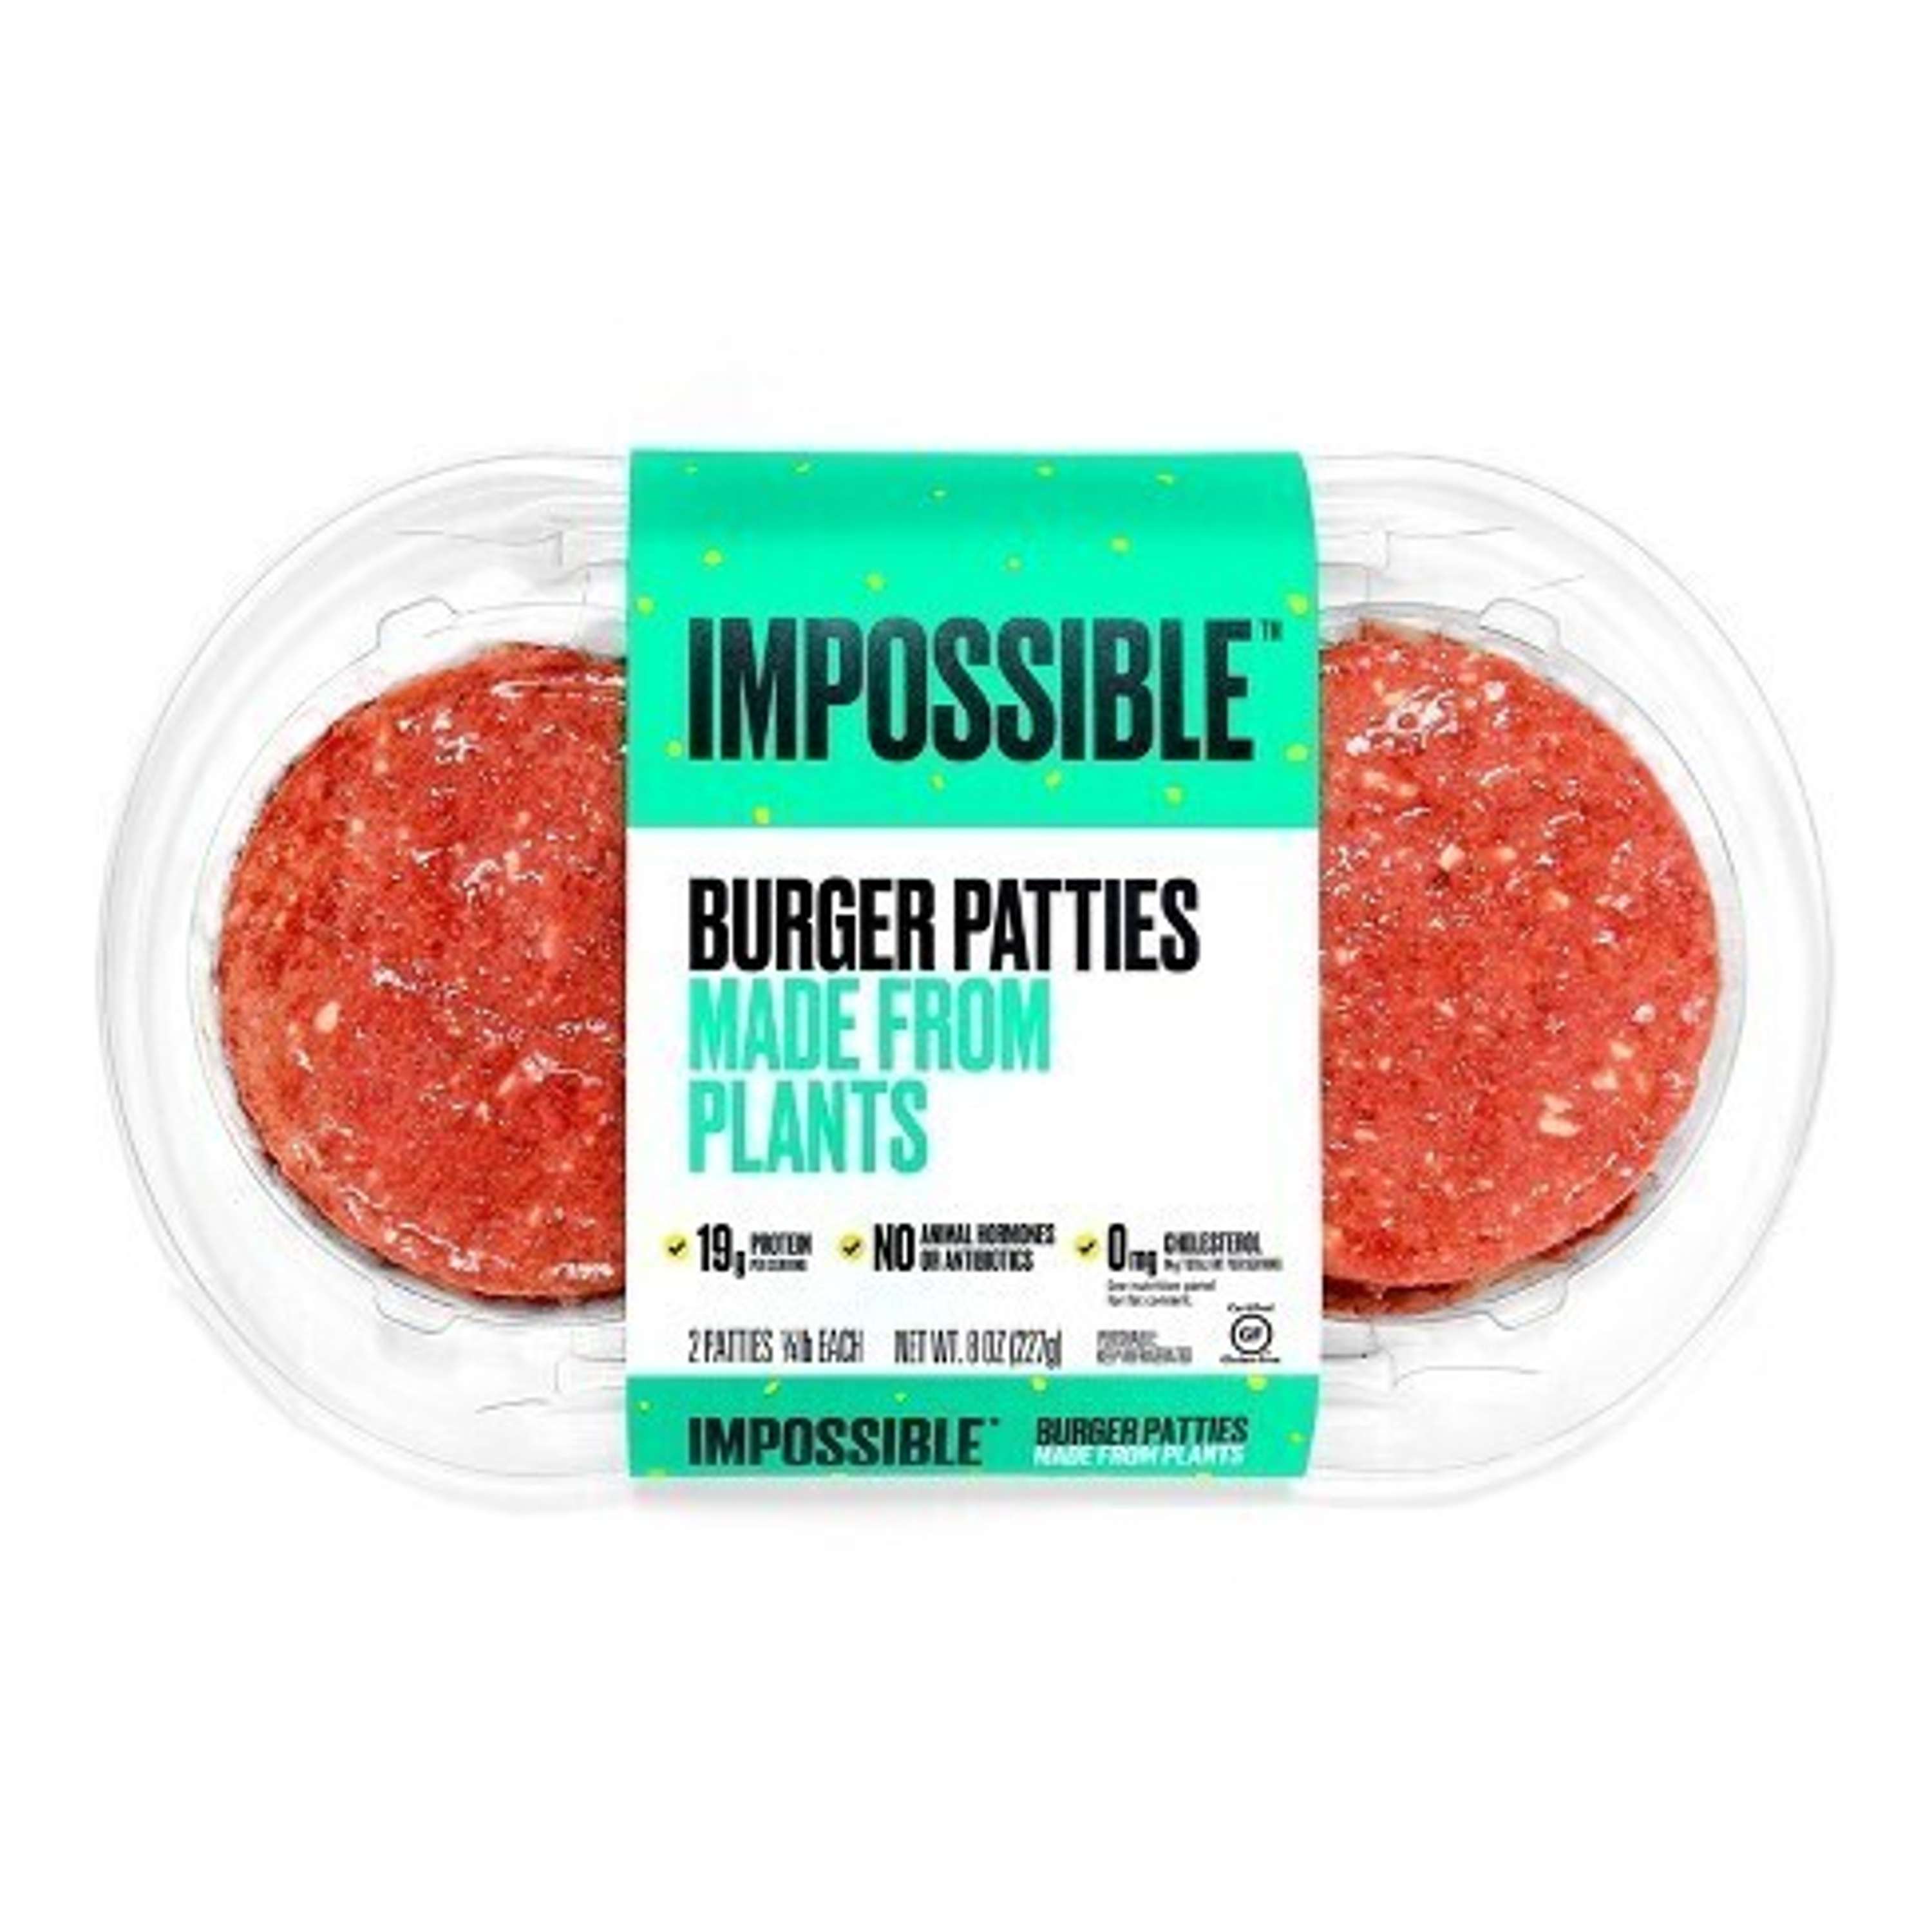 The Impossible Burger and the Fast